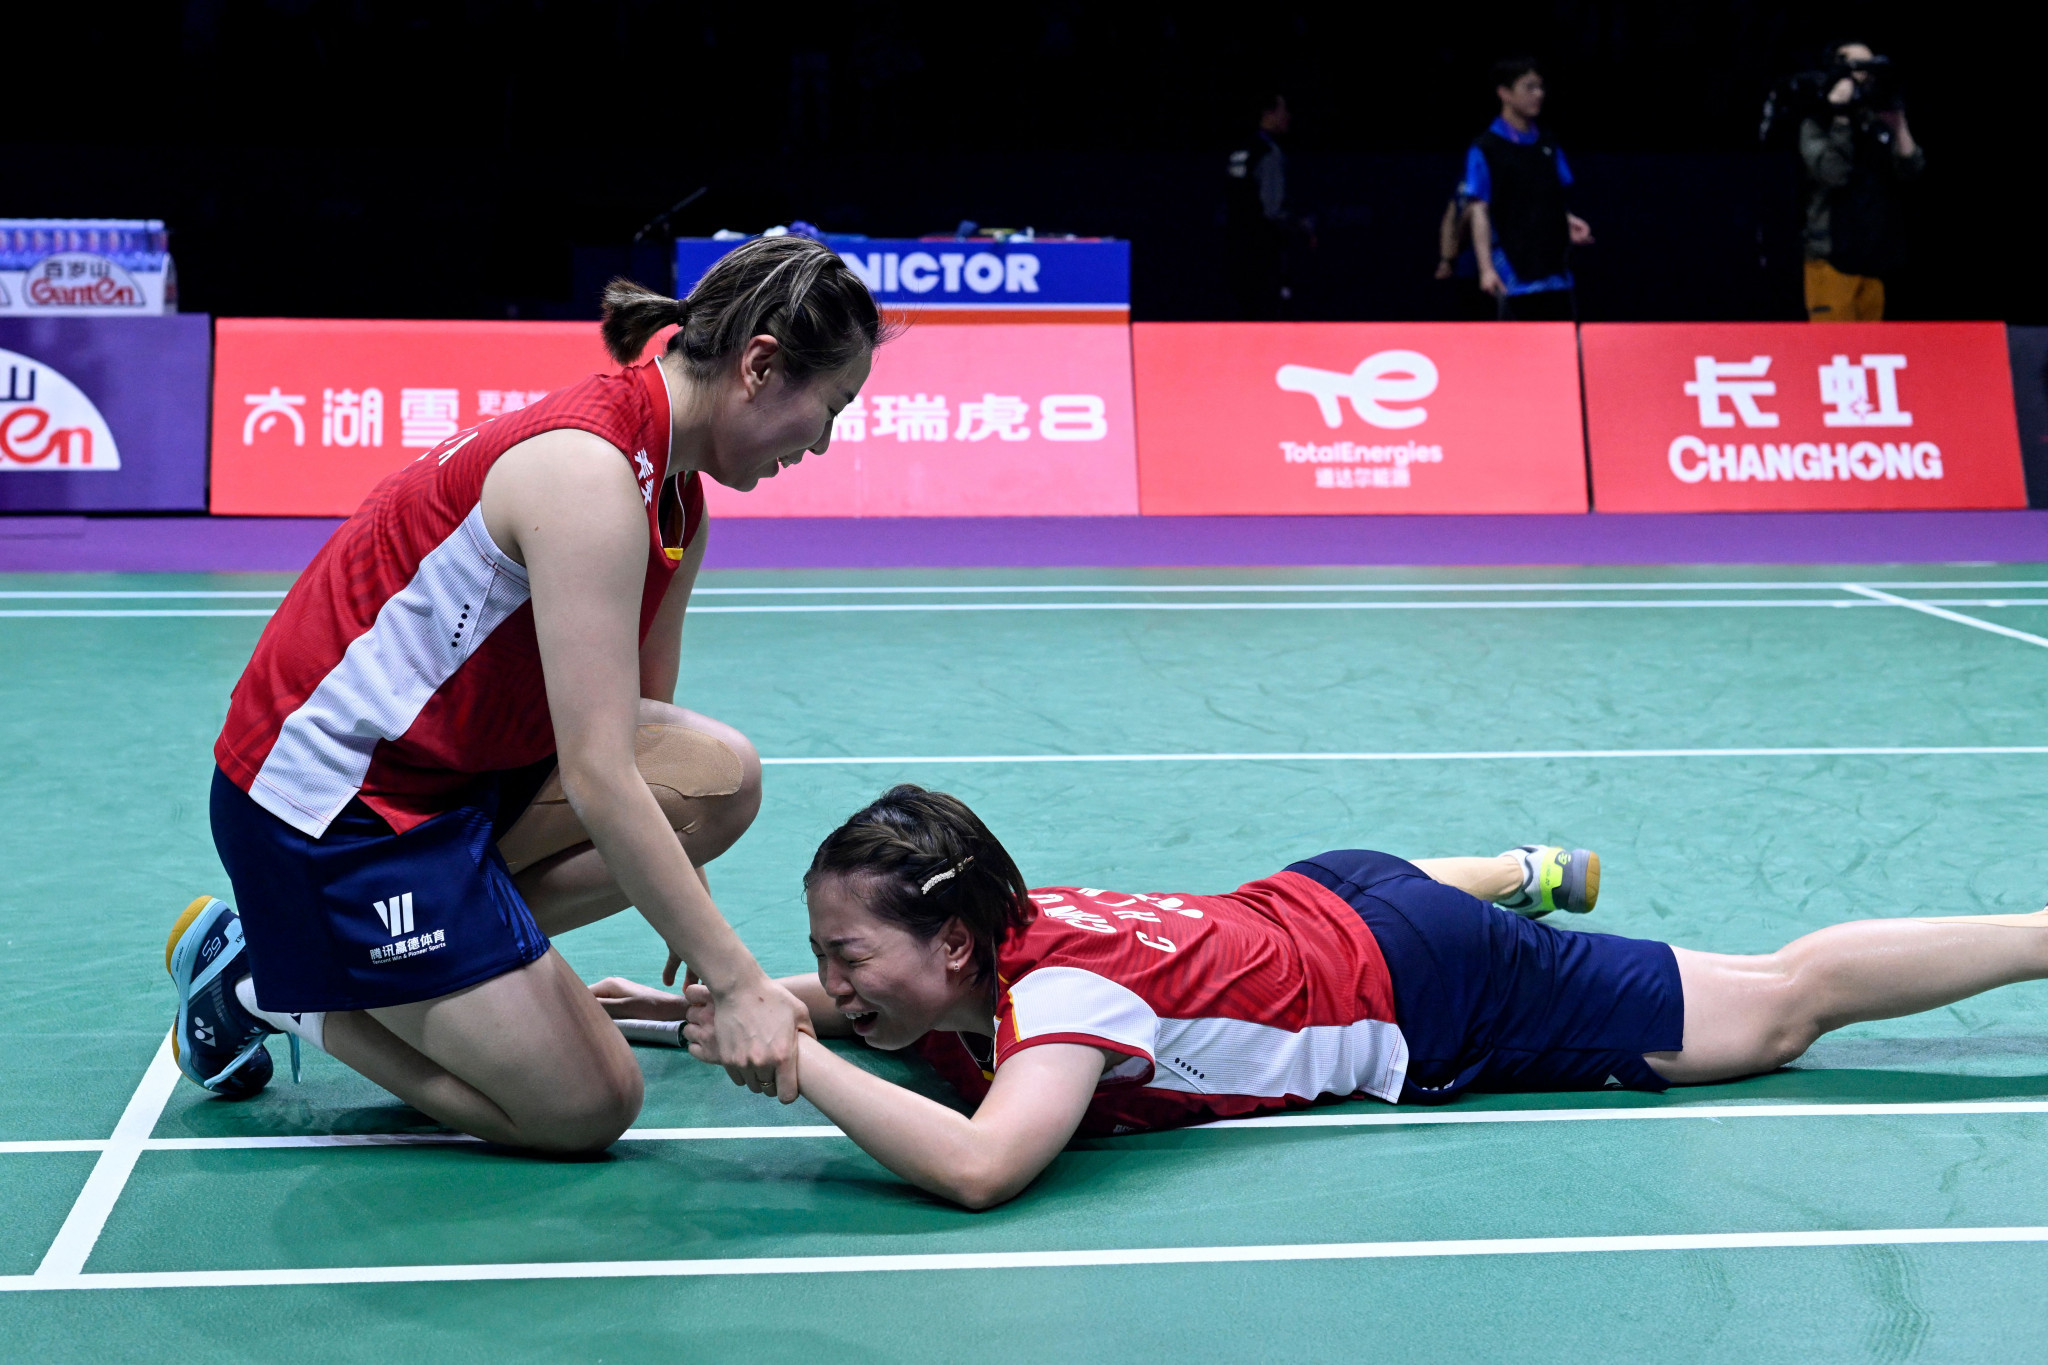 Chen Qingchen, right, and Jia Yifan, left, won the deciding women's doubles match to seal China's place in the Sudirman Cup final ©Getty Images